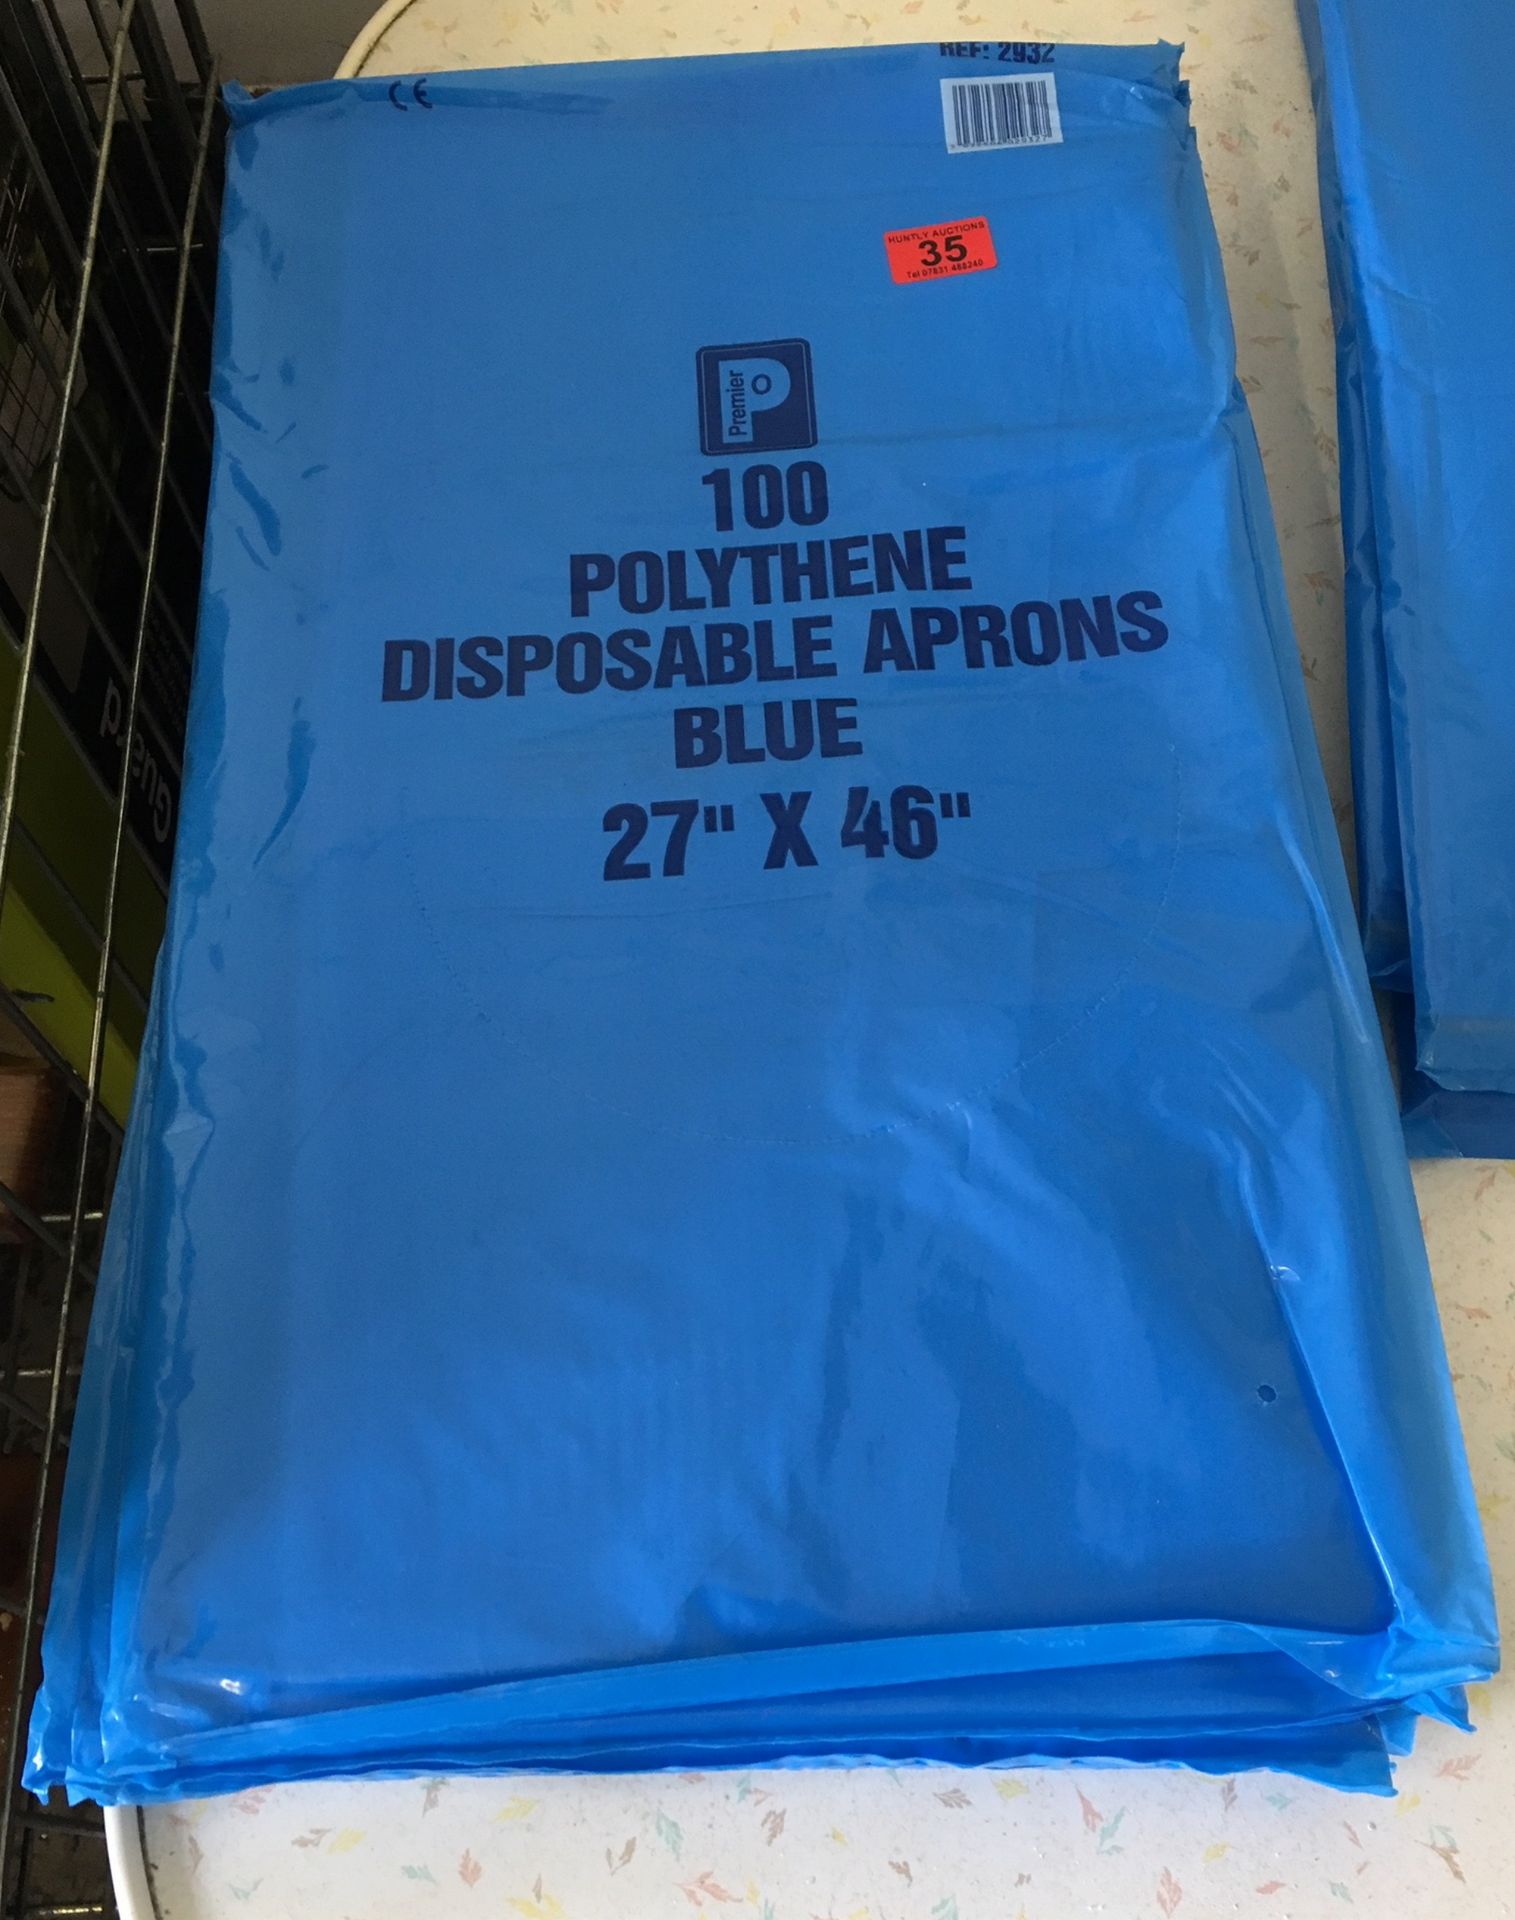 Lot of 5 Packs of Disposable Aprons approx 36" x 24" with 100 in each pack.